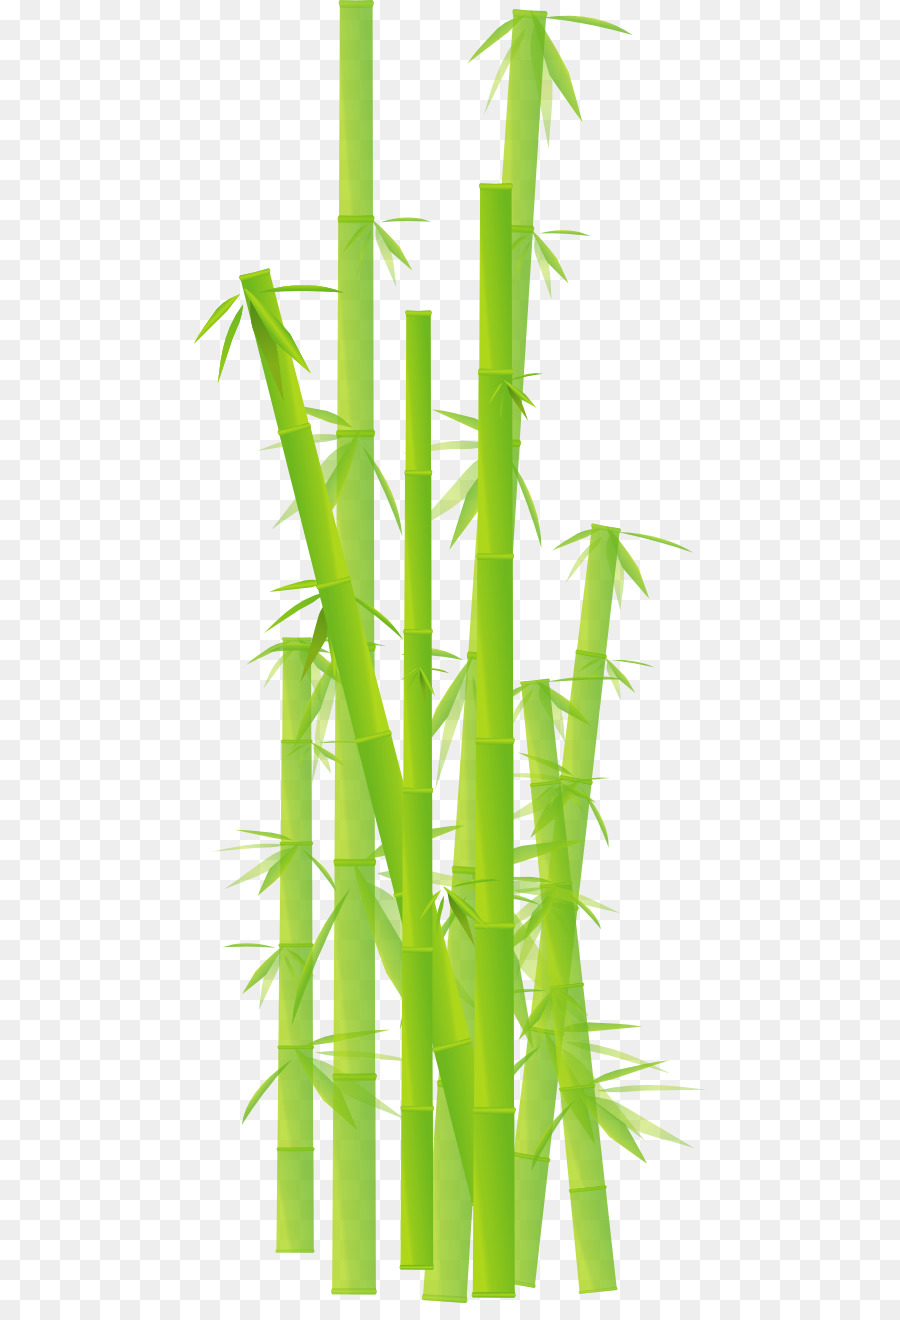 Bamboo Clip art - Bamboo Cliparts png download - 512*1303 - Free Transparent Bamboo png Download.